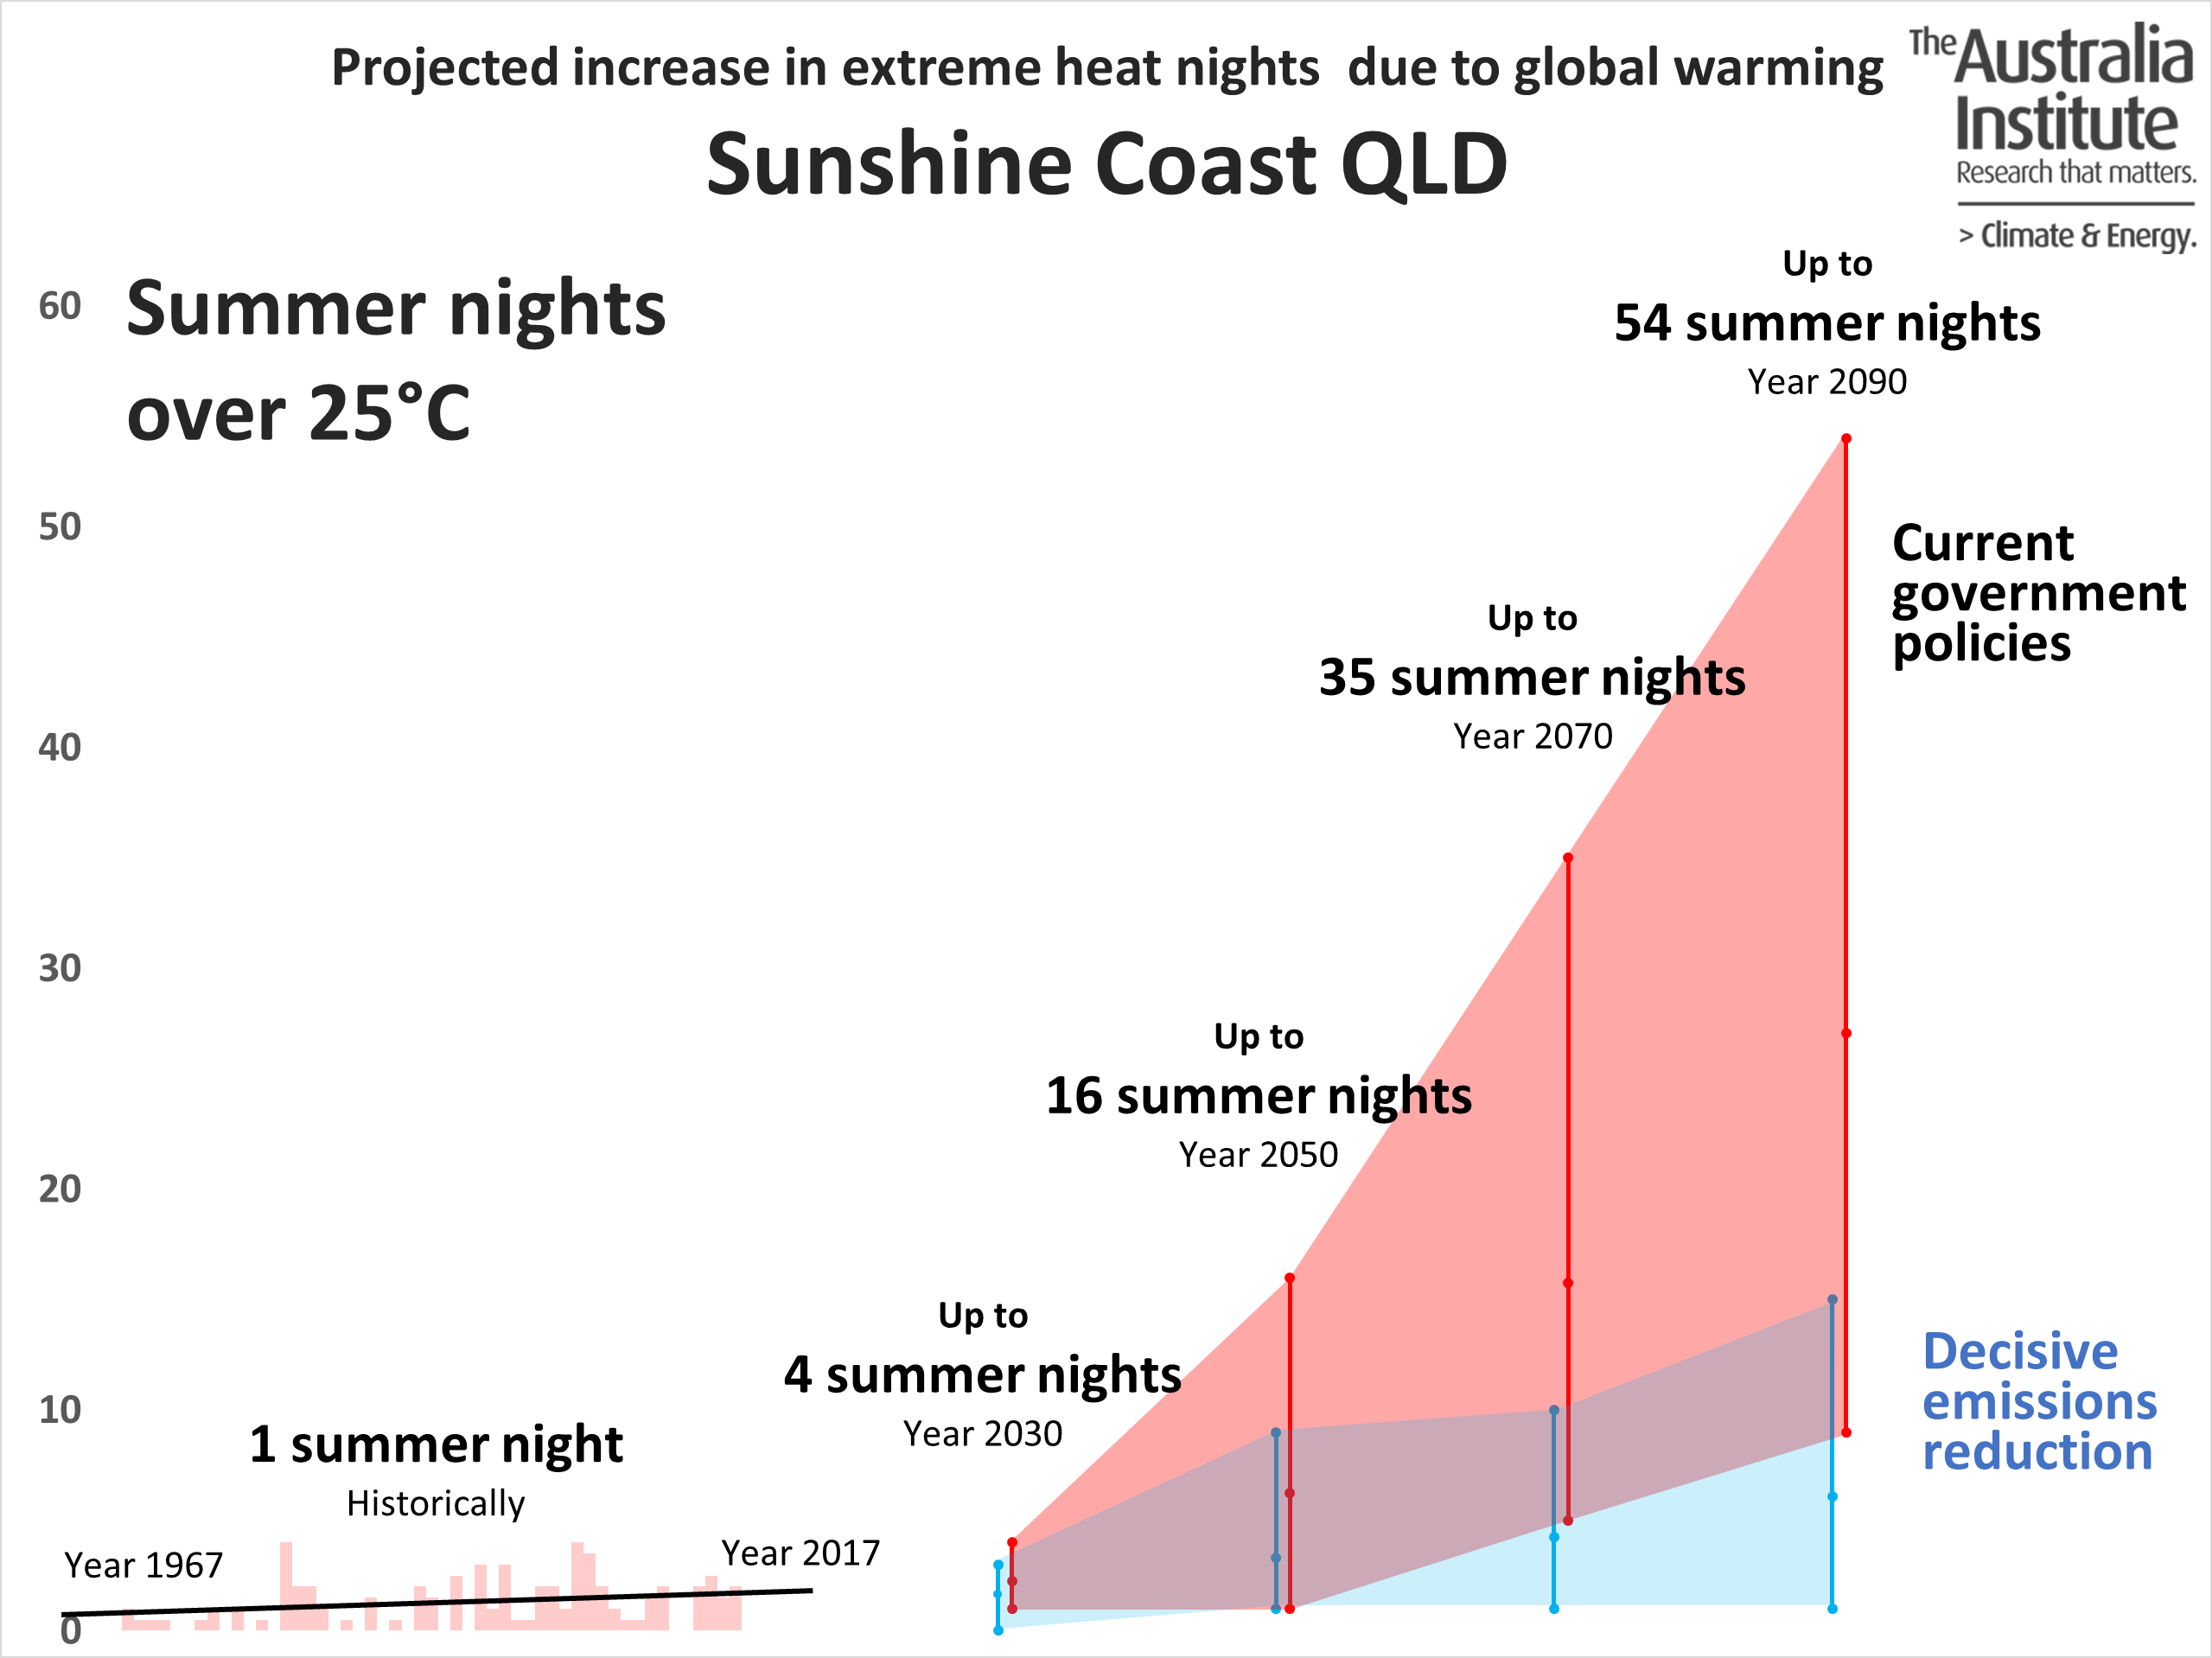 Projected nights over 35C on the Sunshine Coast